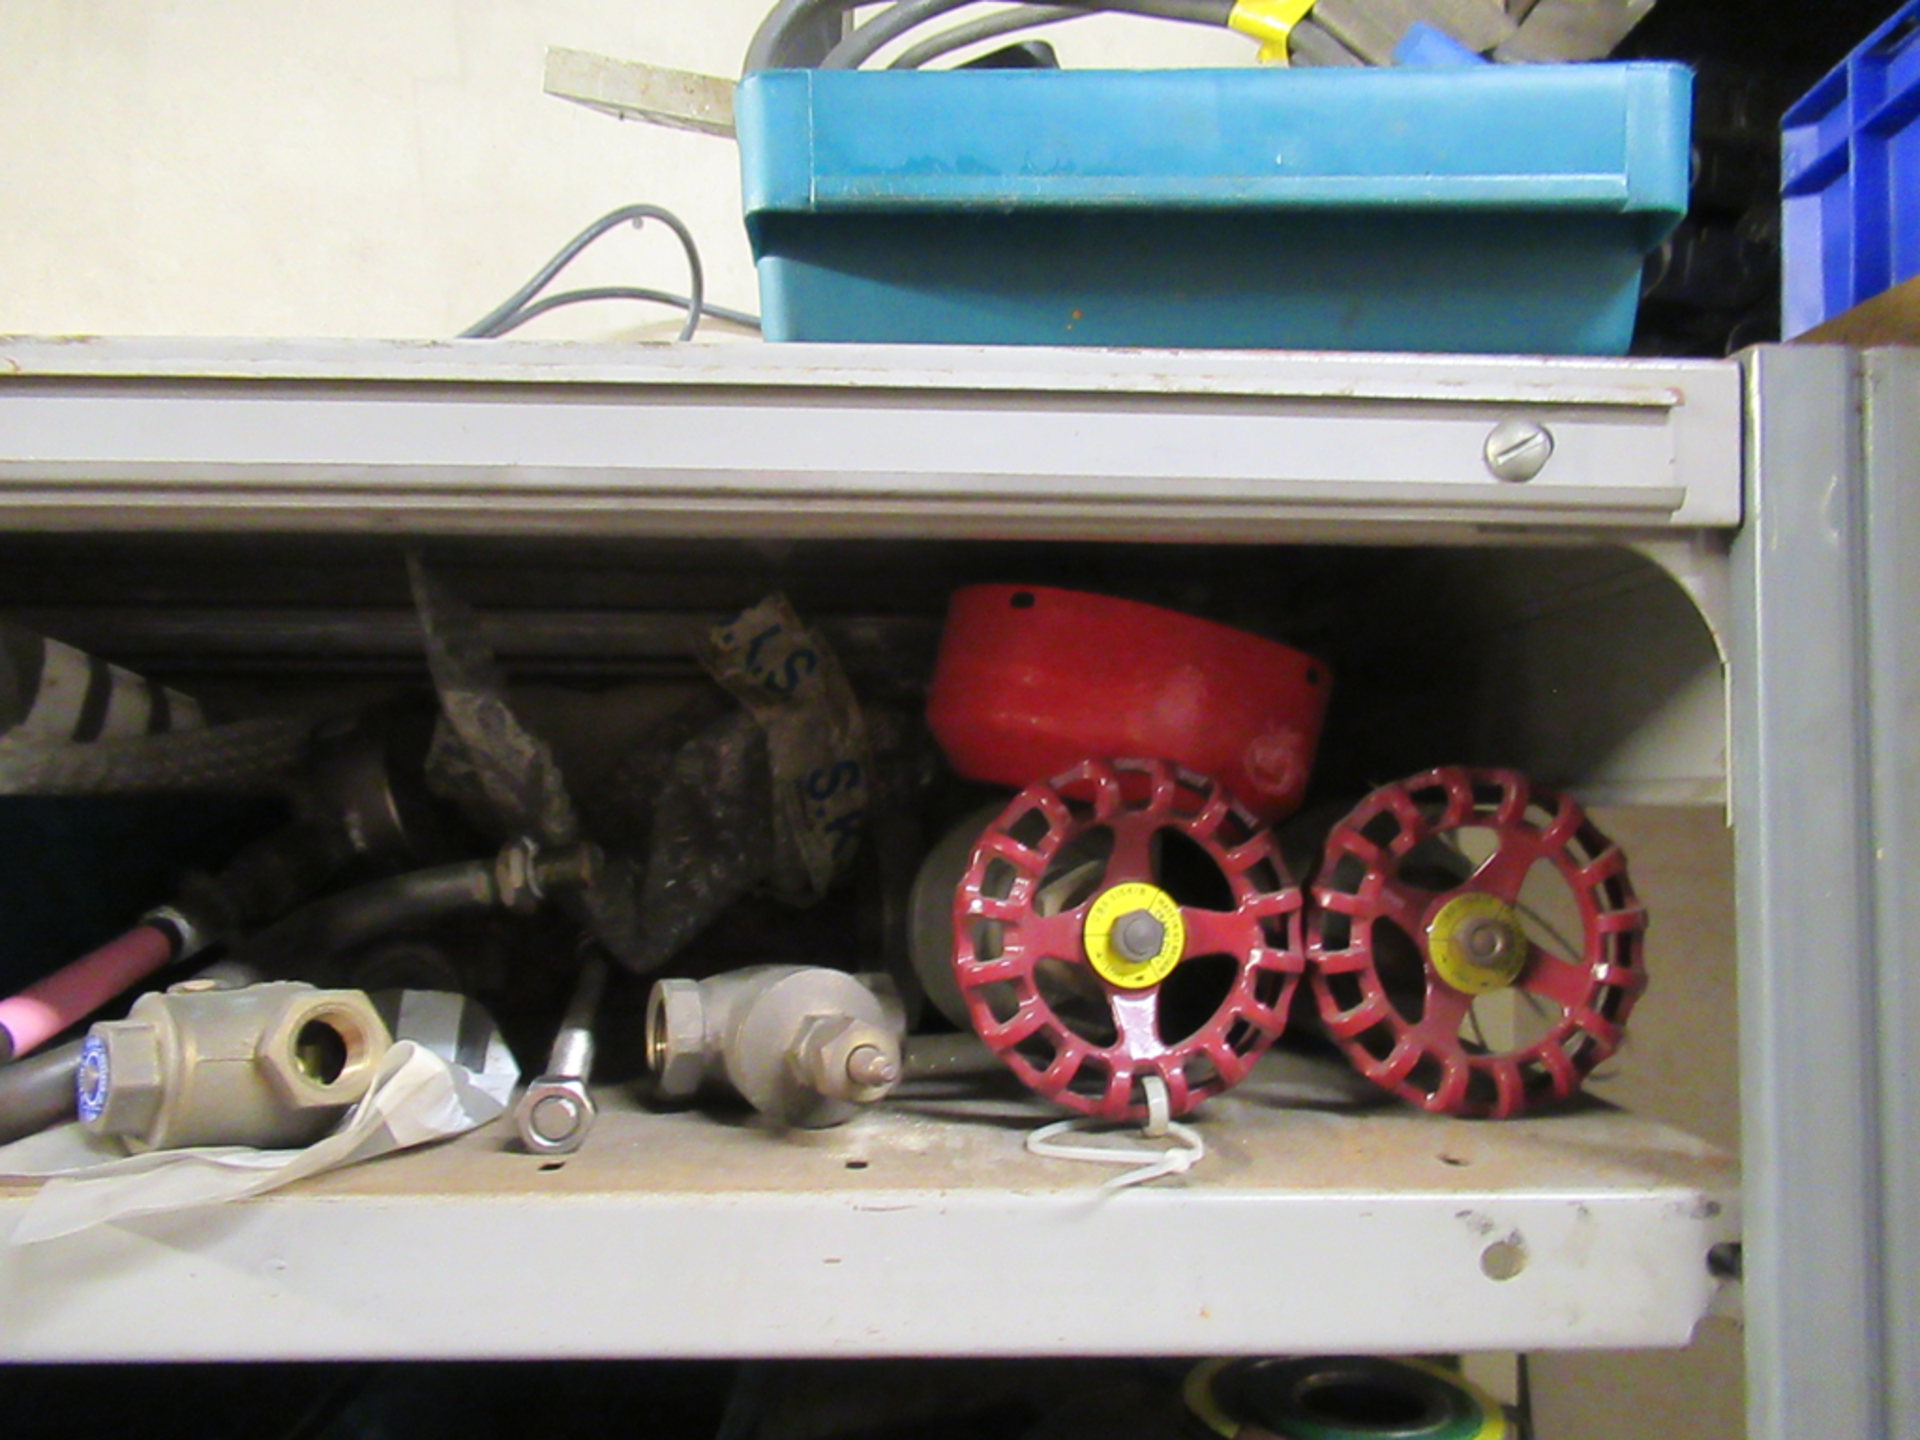 Content of 12-bays of Shelving to include Larqge qty of Spare Parts, Cable, Assorted Bearings, Valve - Image 13 of 38